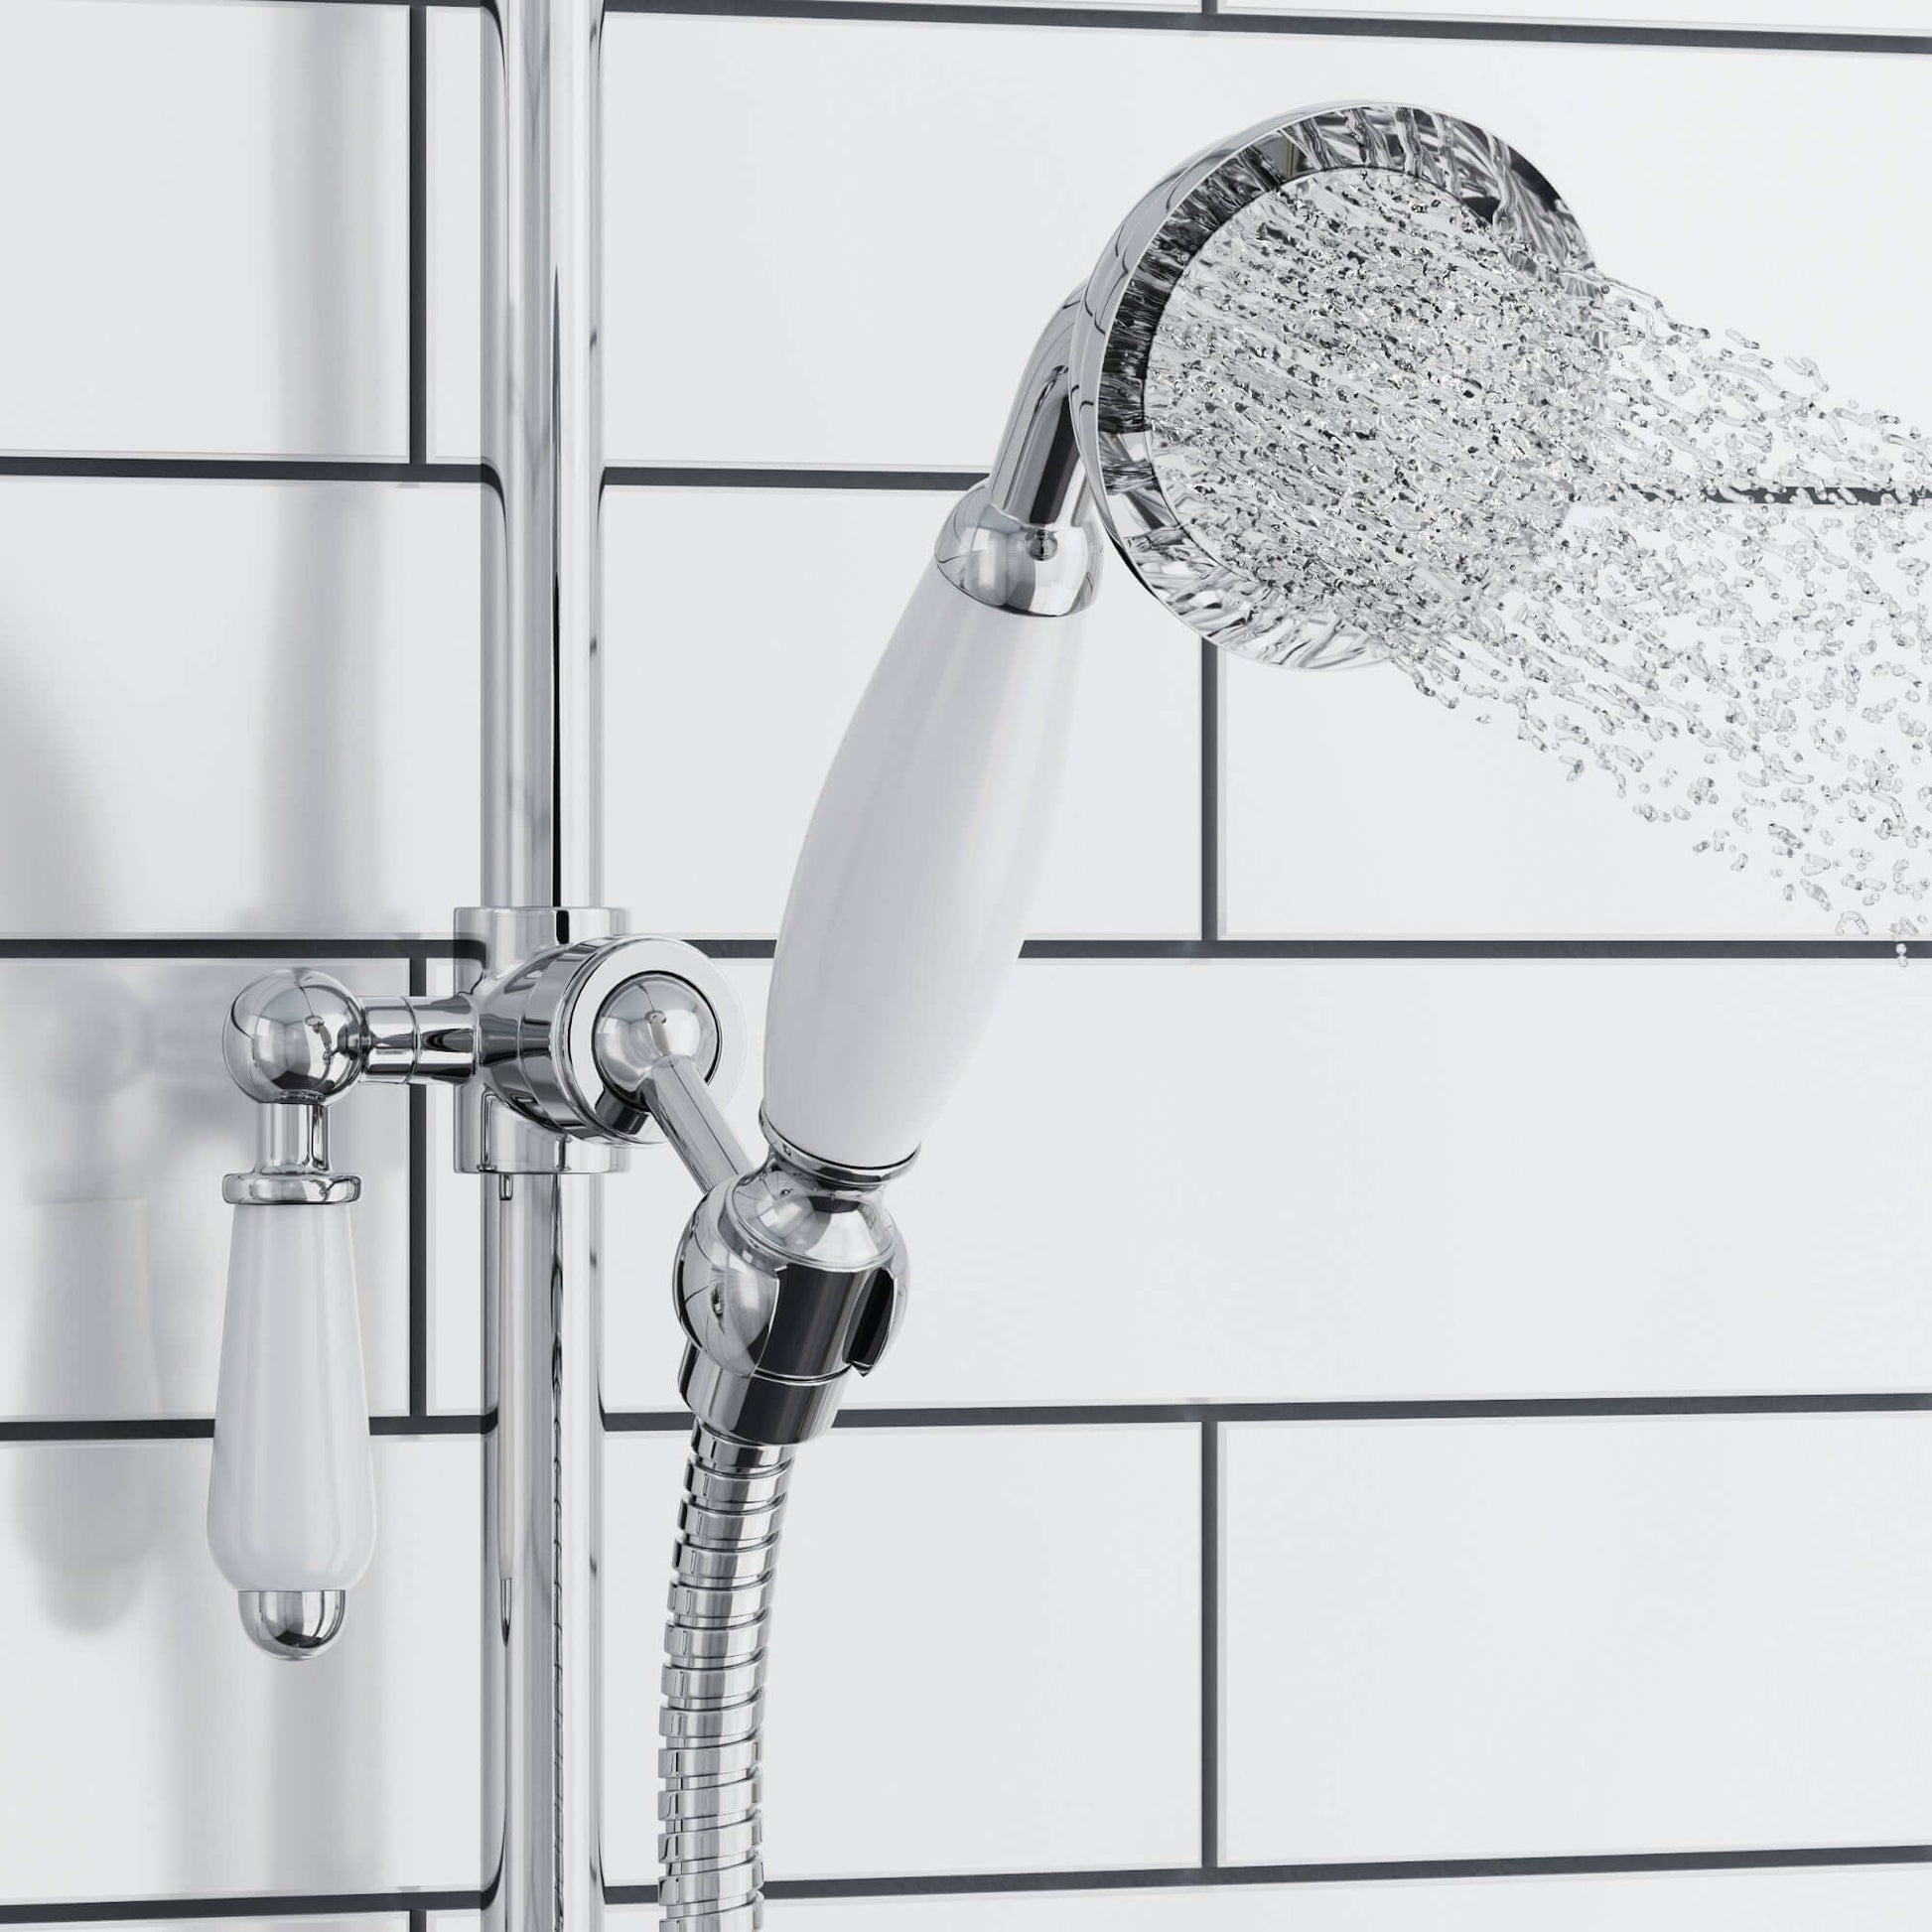 Downton Exposed Traditional Thermostatic Shower Set 3 Outlet, Incl. Triple Shower Valve, Rigid Riser Rail, 200mm Shower Head, Handset & Bath Filler - Chrome And White - Showers